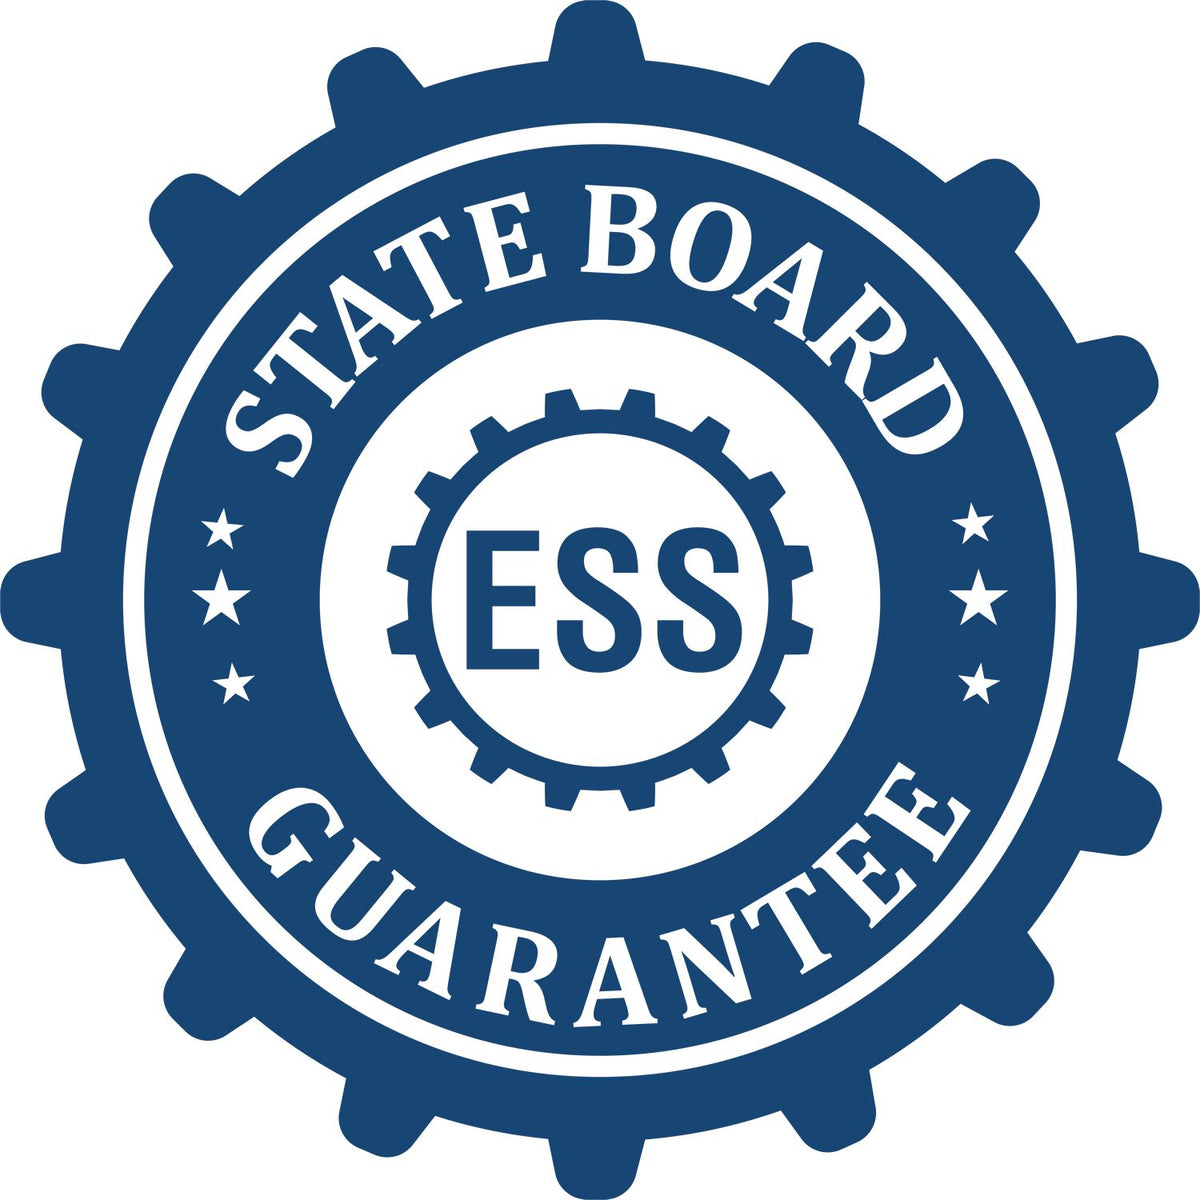 An emblem in a gear shape illustrating a state board guarantee for the Connecticut Professional Geologist Seal Stamp